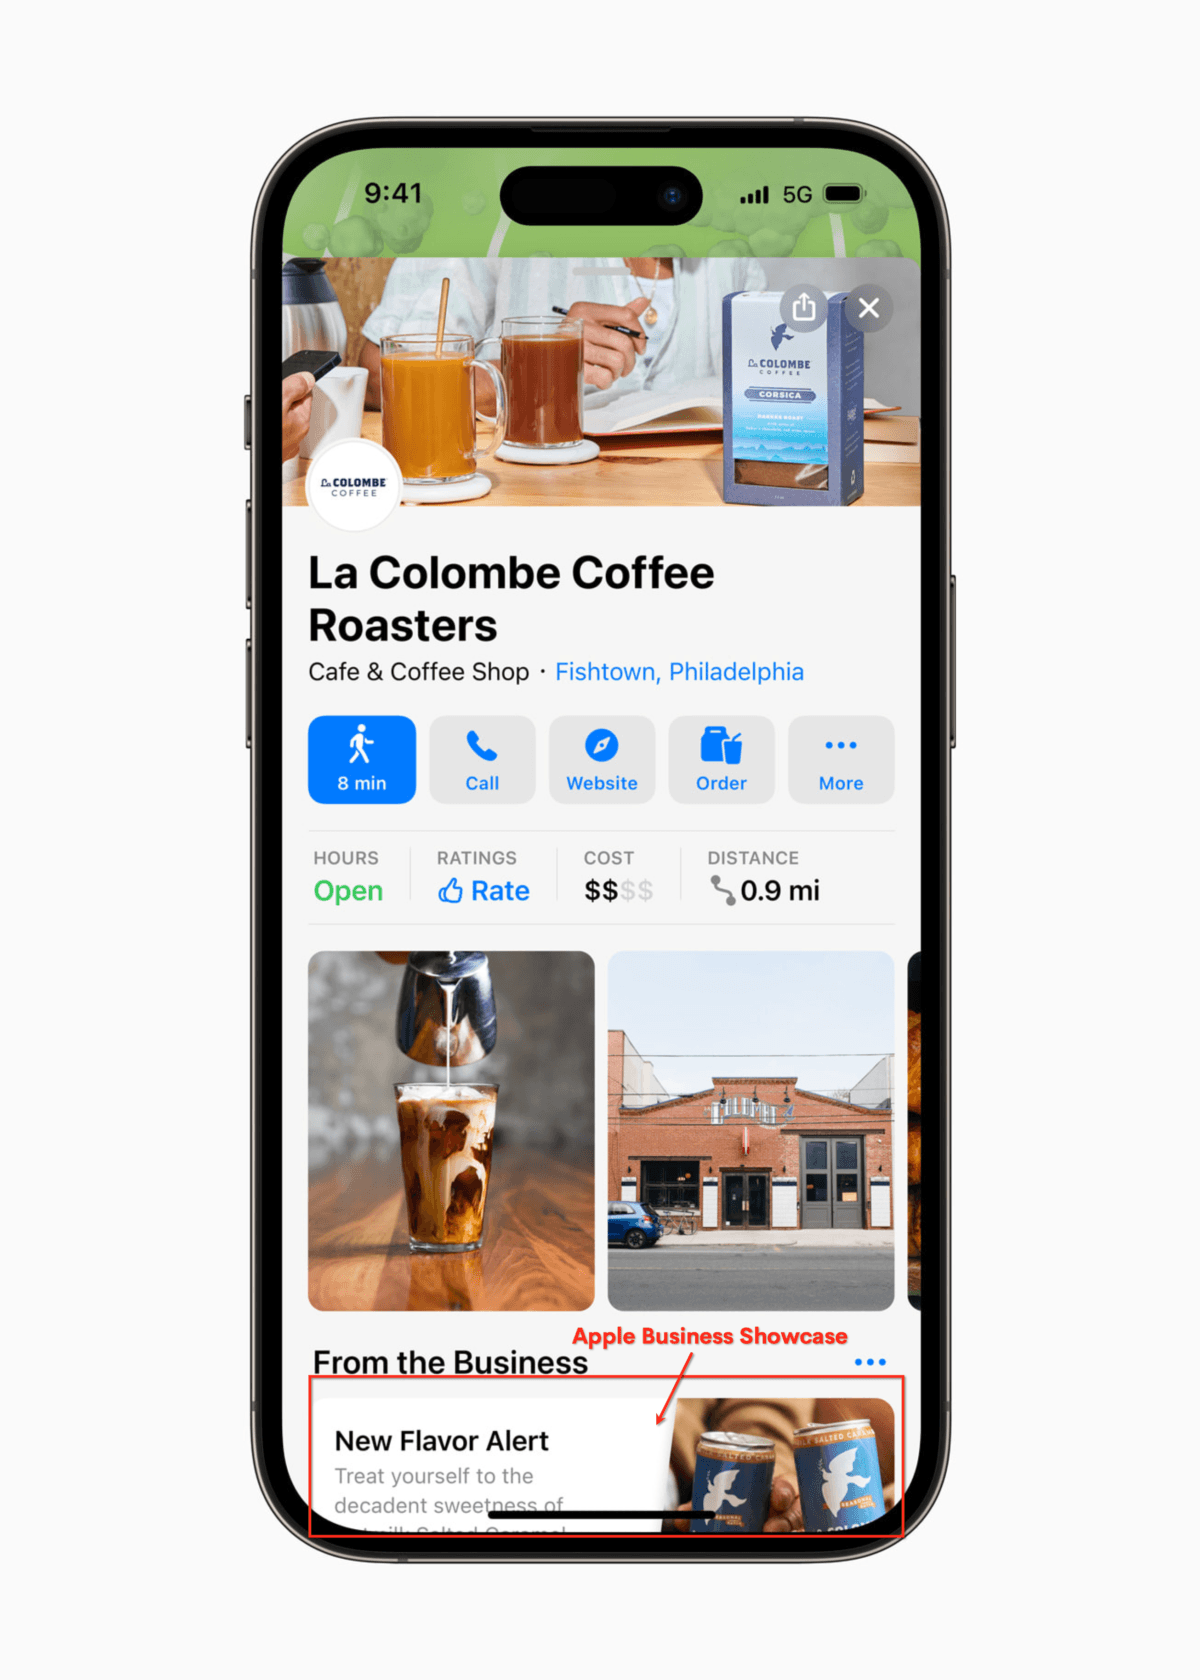 Example of La Colombe Coffee Roasters Apple Business Place Card and Showcase on iPhone